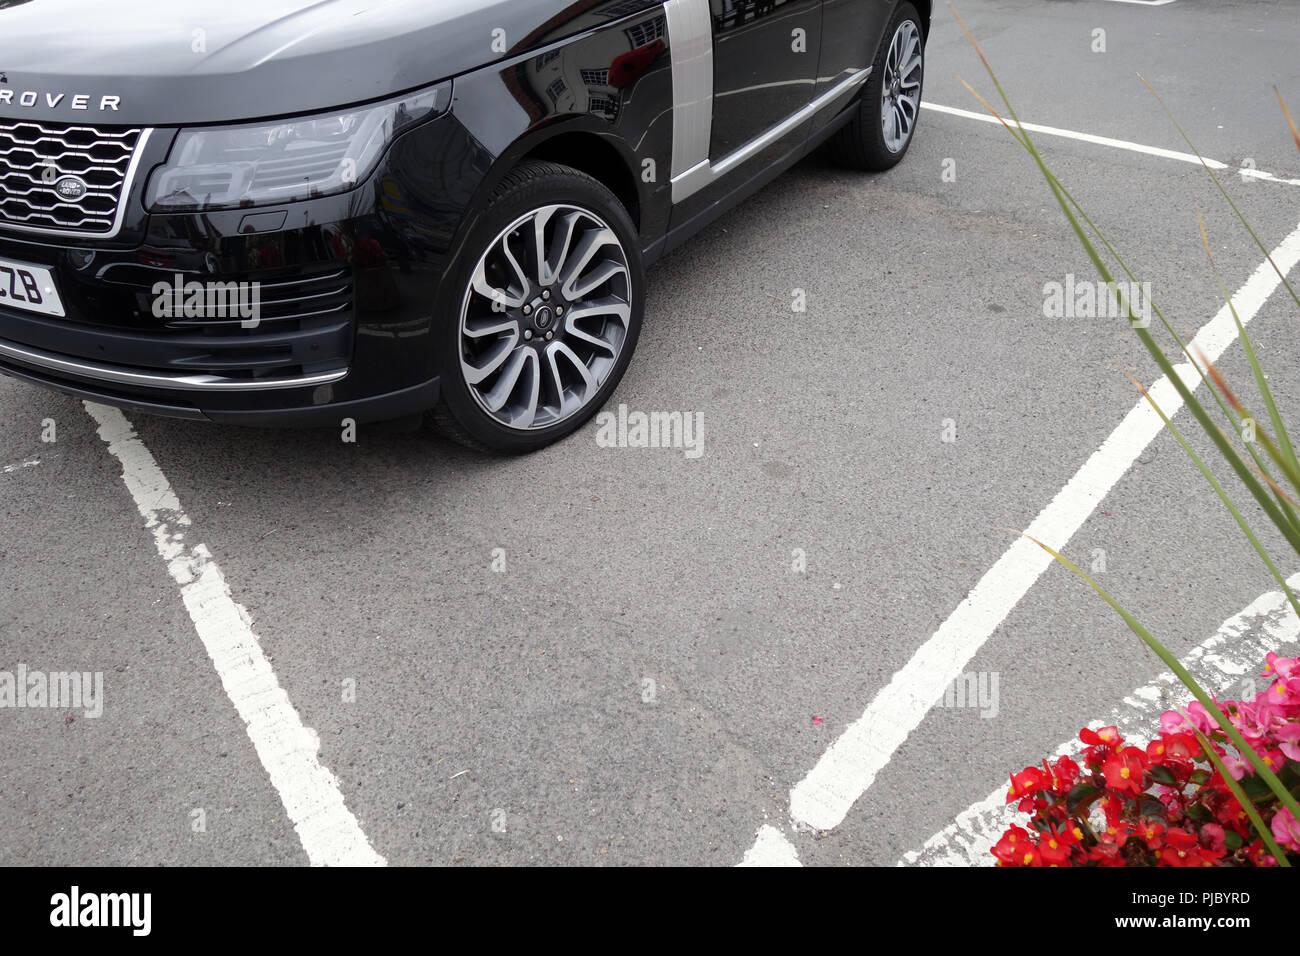 Range Rover Bad Parking in parking bay Stock Photo